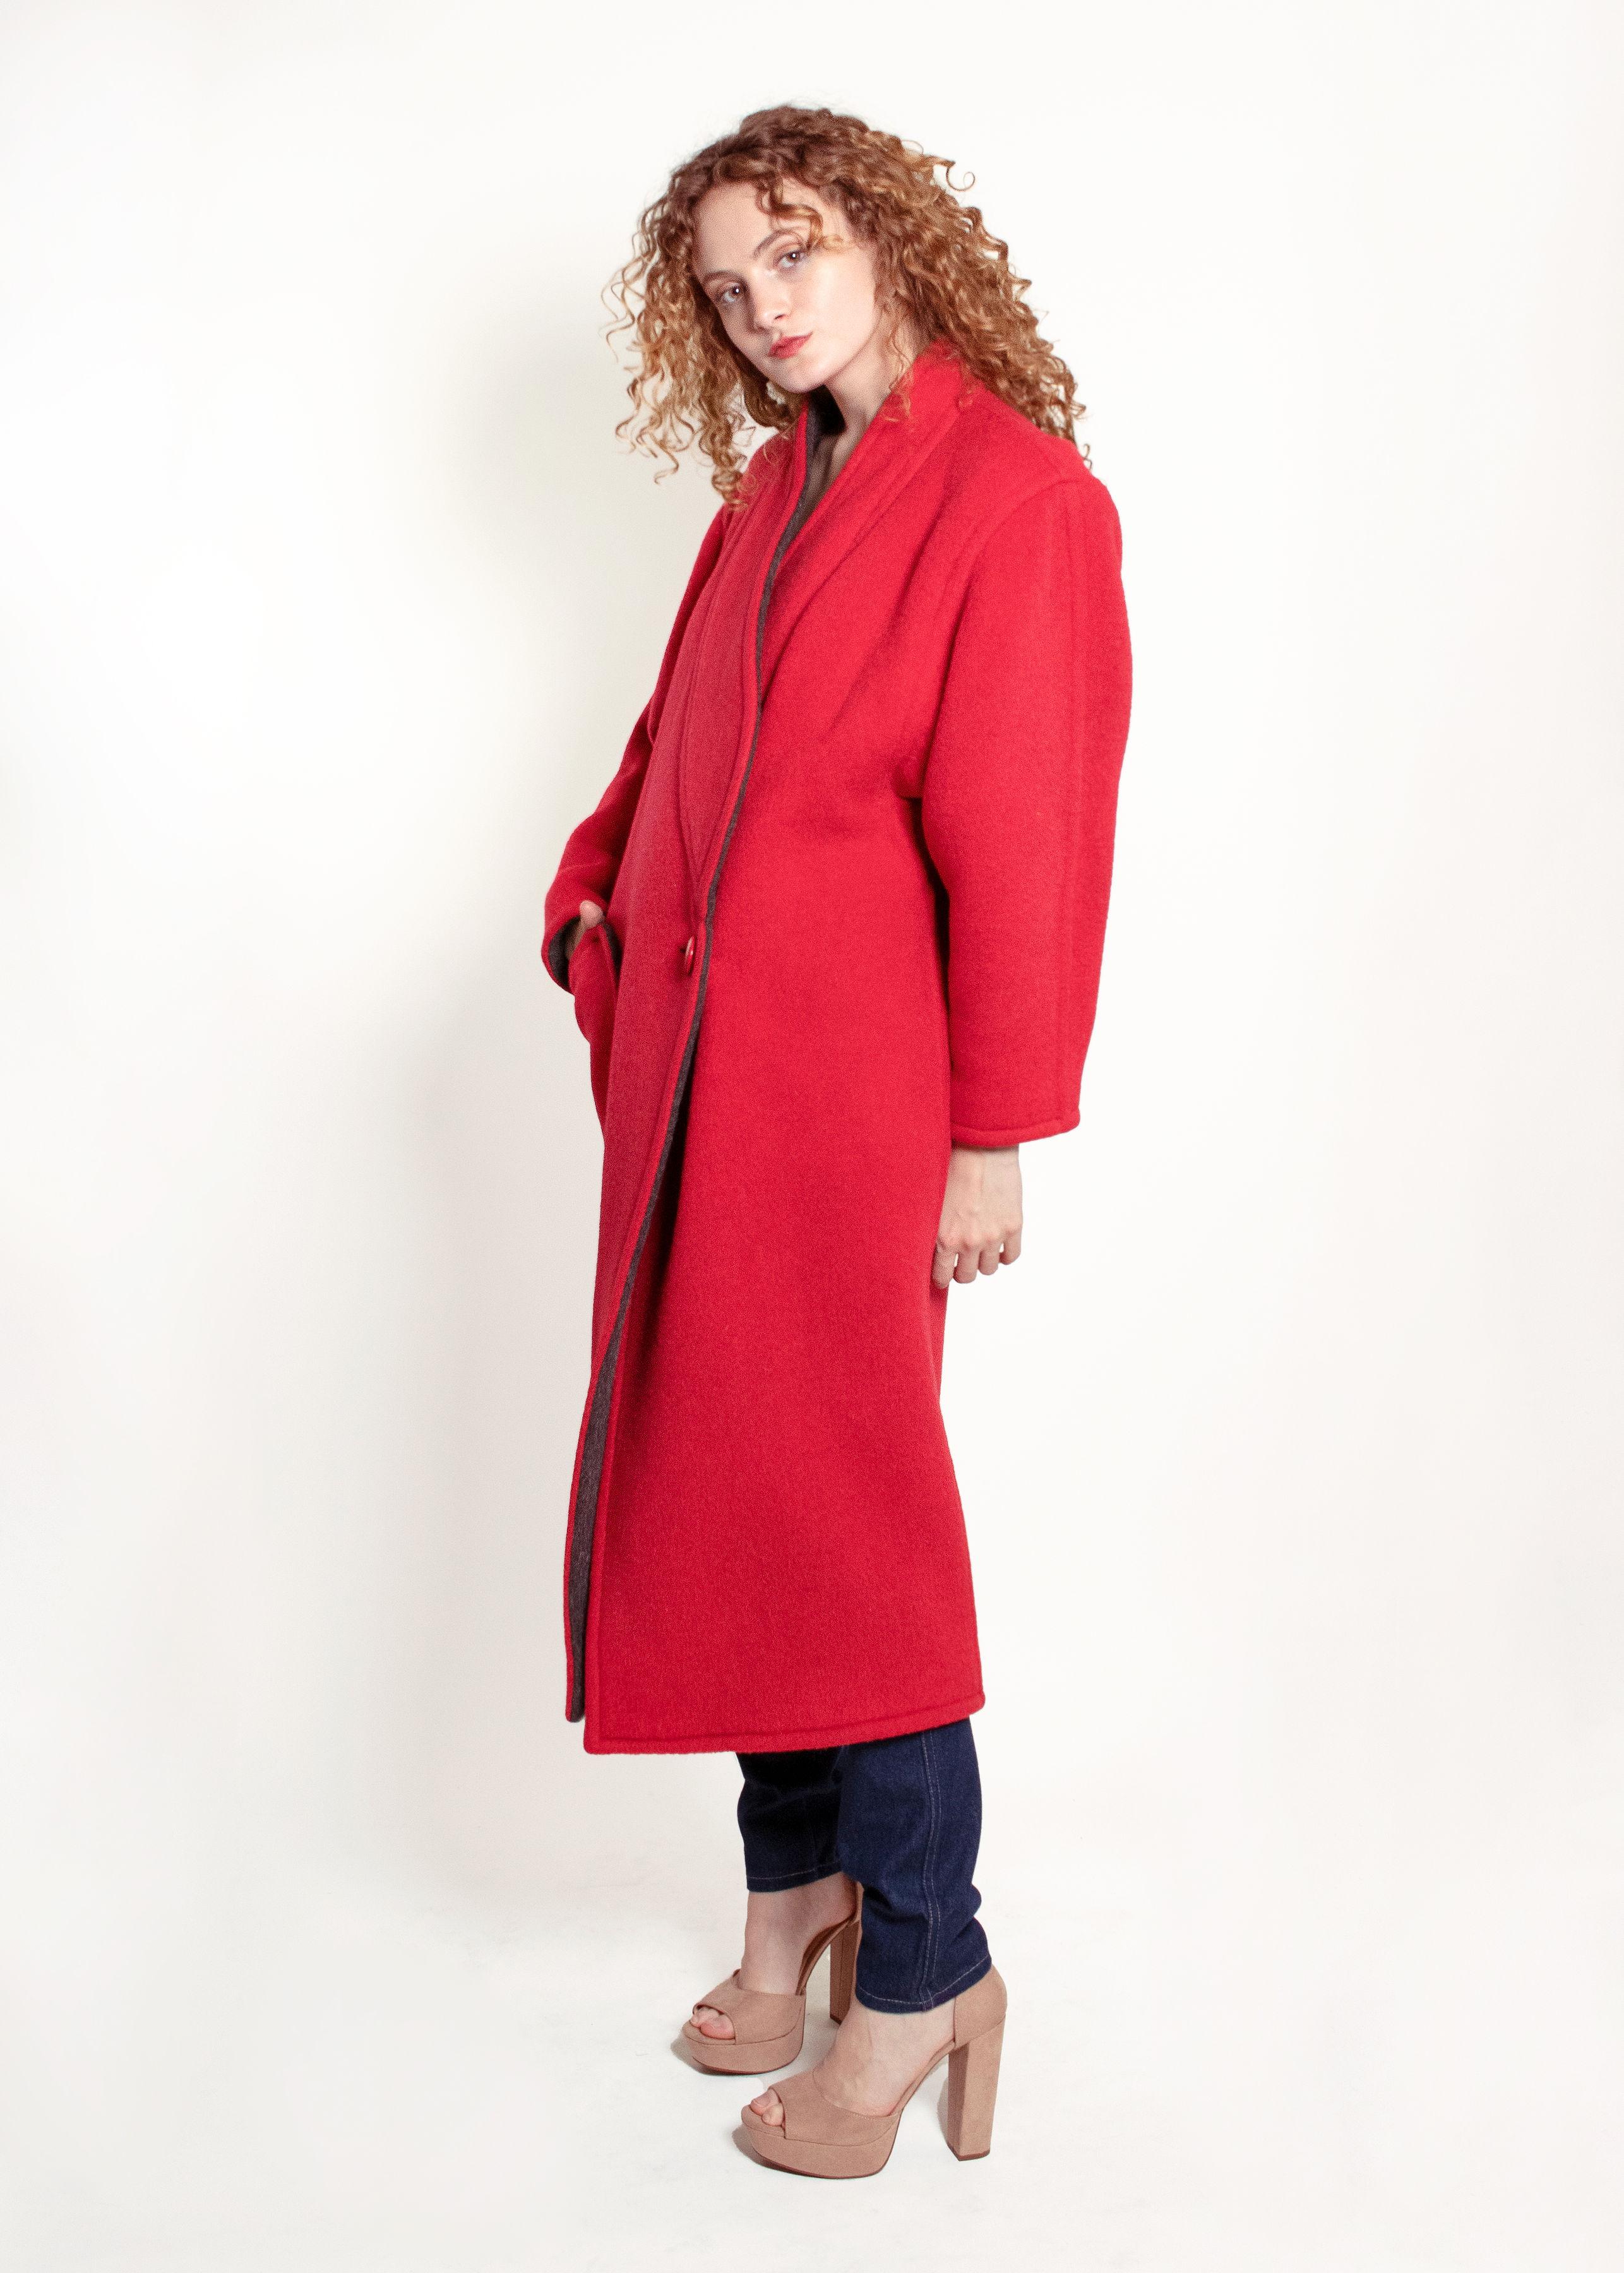 Women's or Men's Courreges Red Wool Coat For Sale